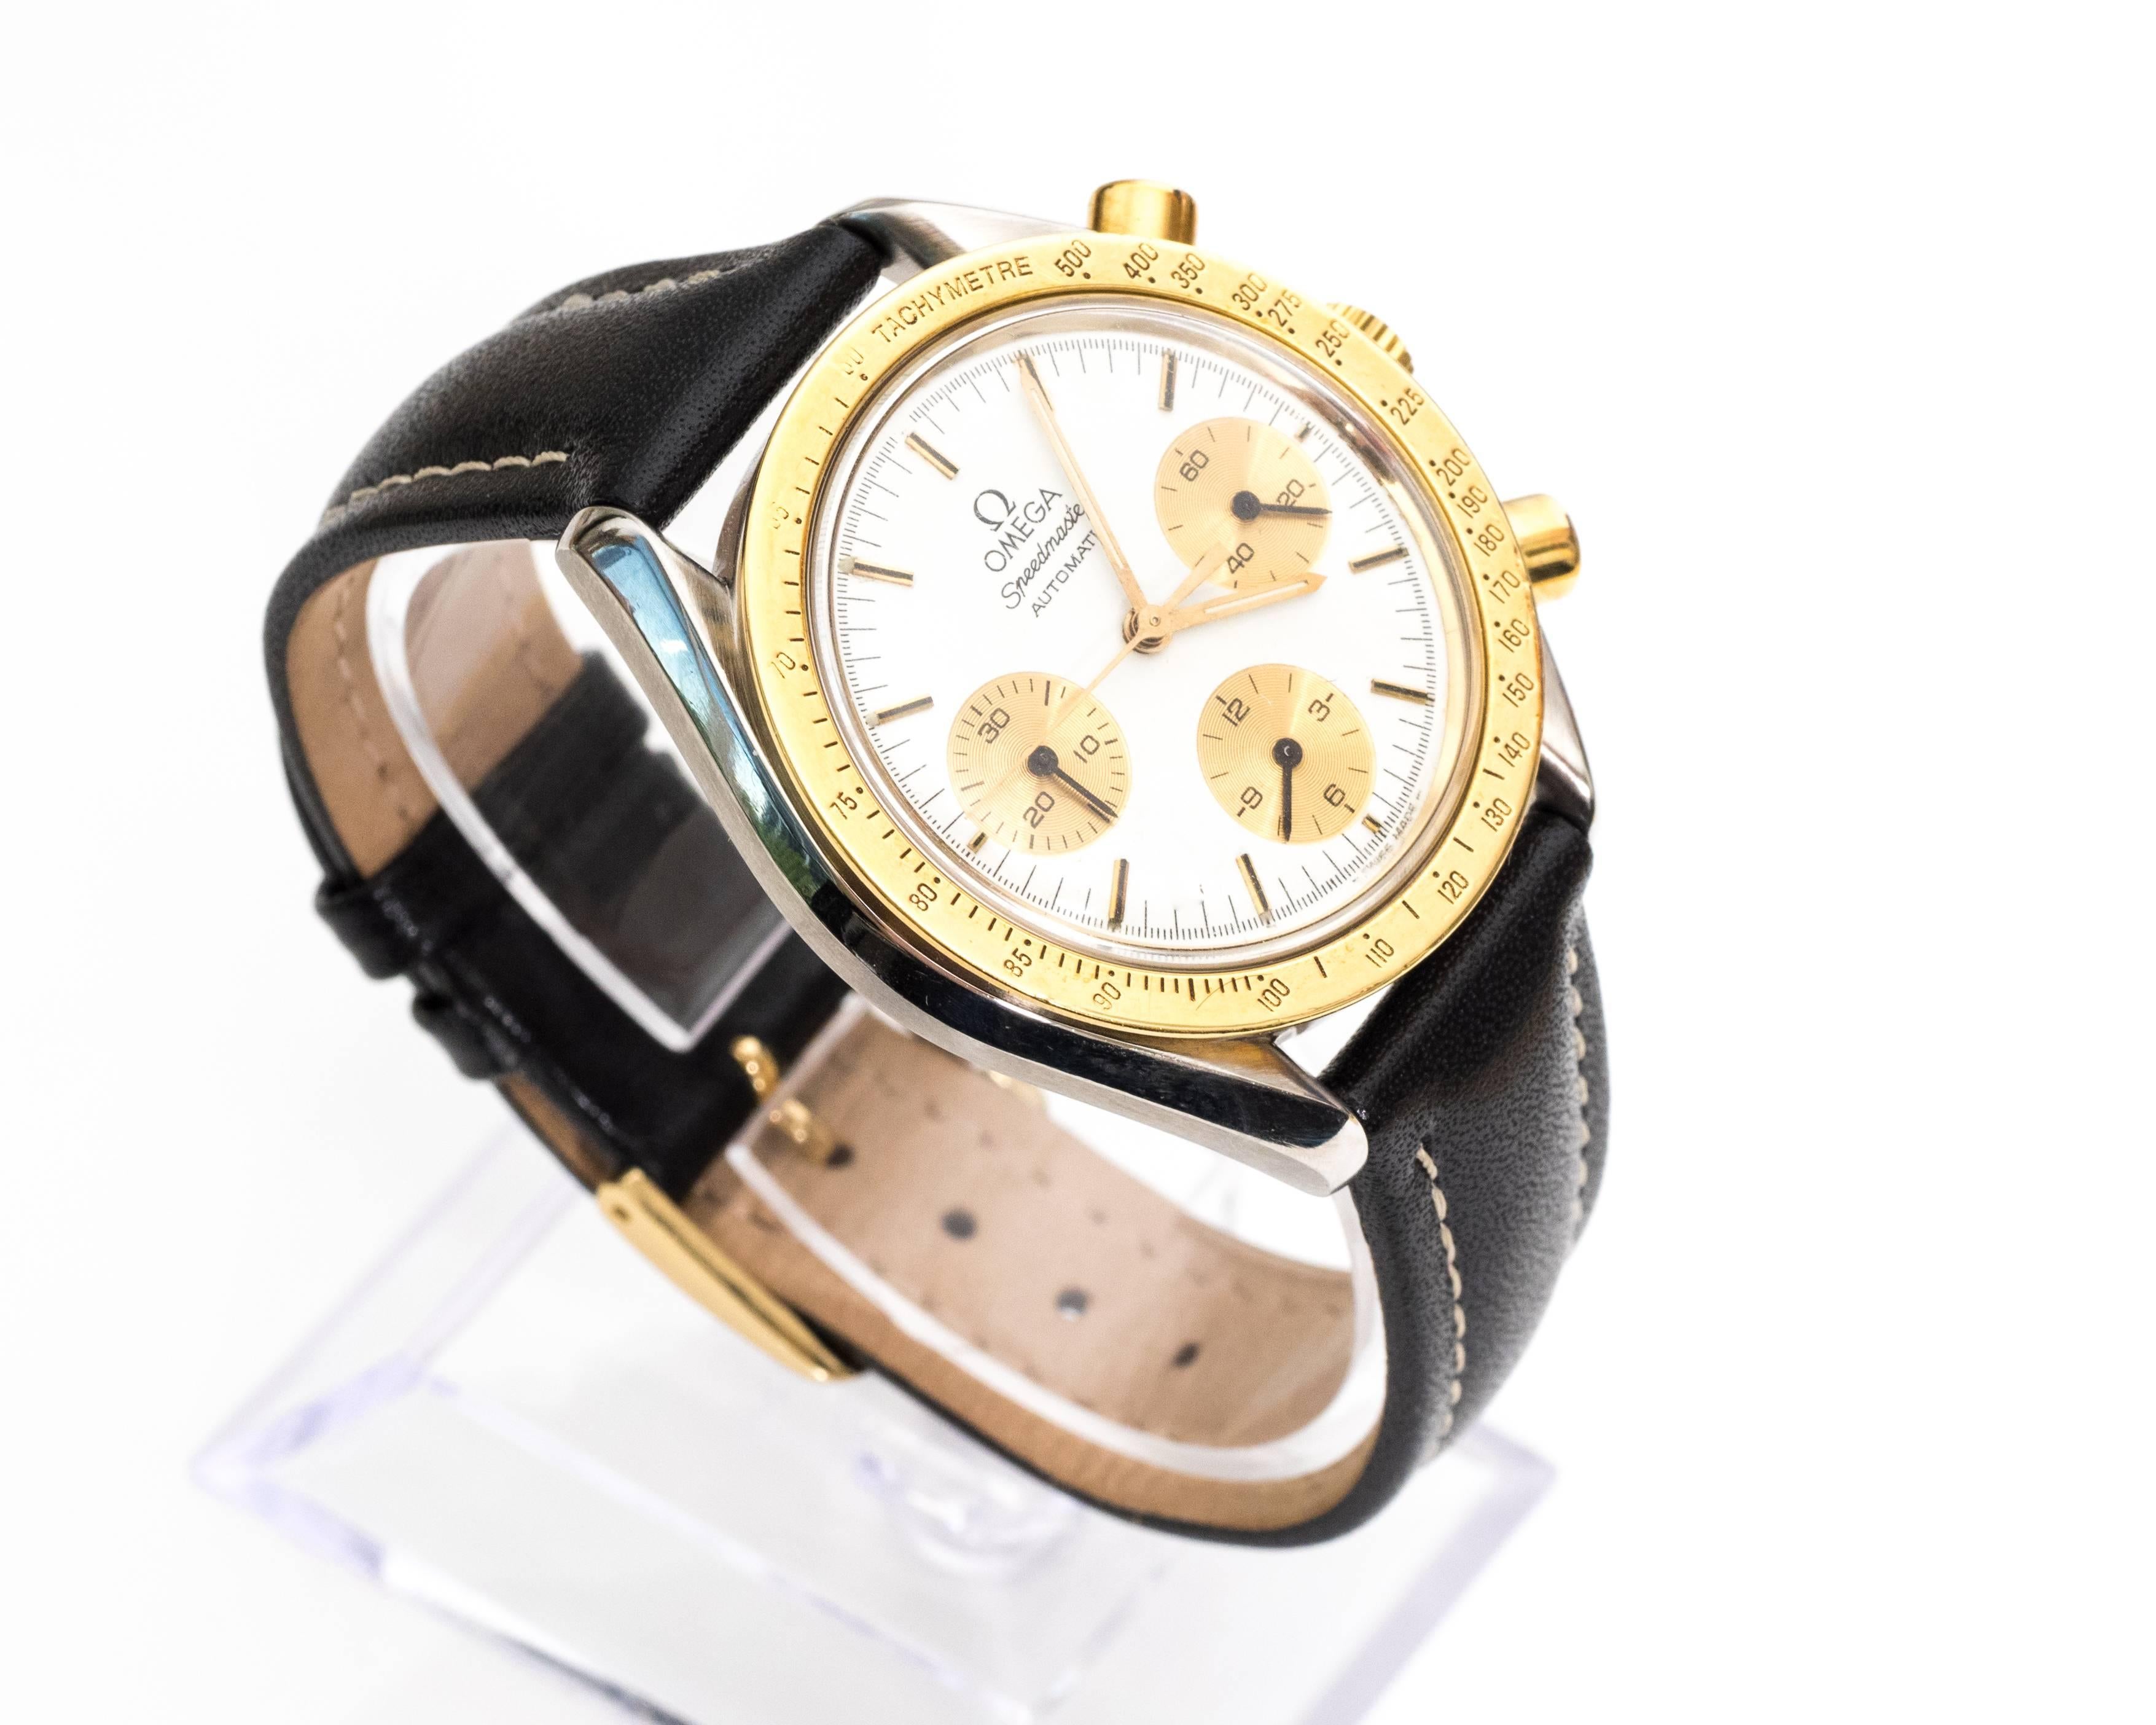 Modern Omega Yellow and White Gold Speedmaster Chronograph Automatic Wristwatch